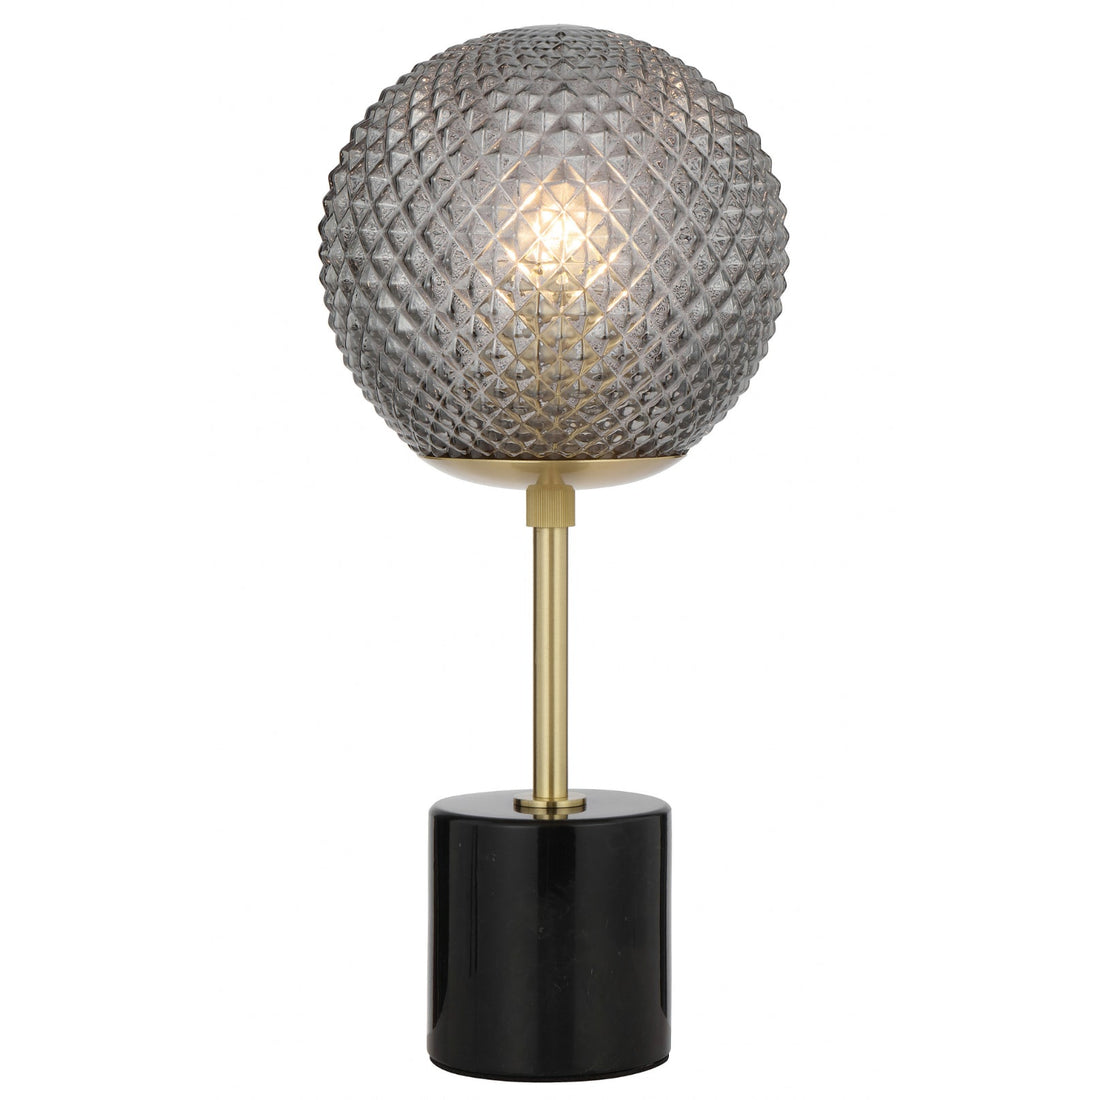 Elwick Black Marble and Antique Brass with Smoke Modern Table Lamp